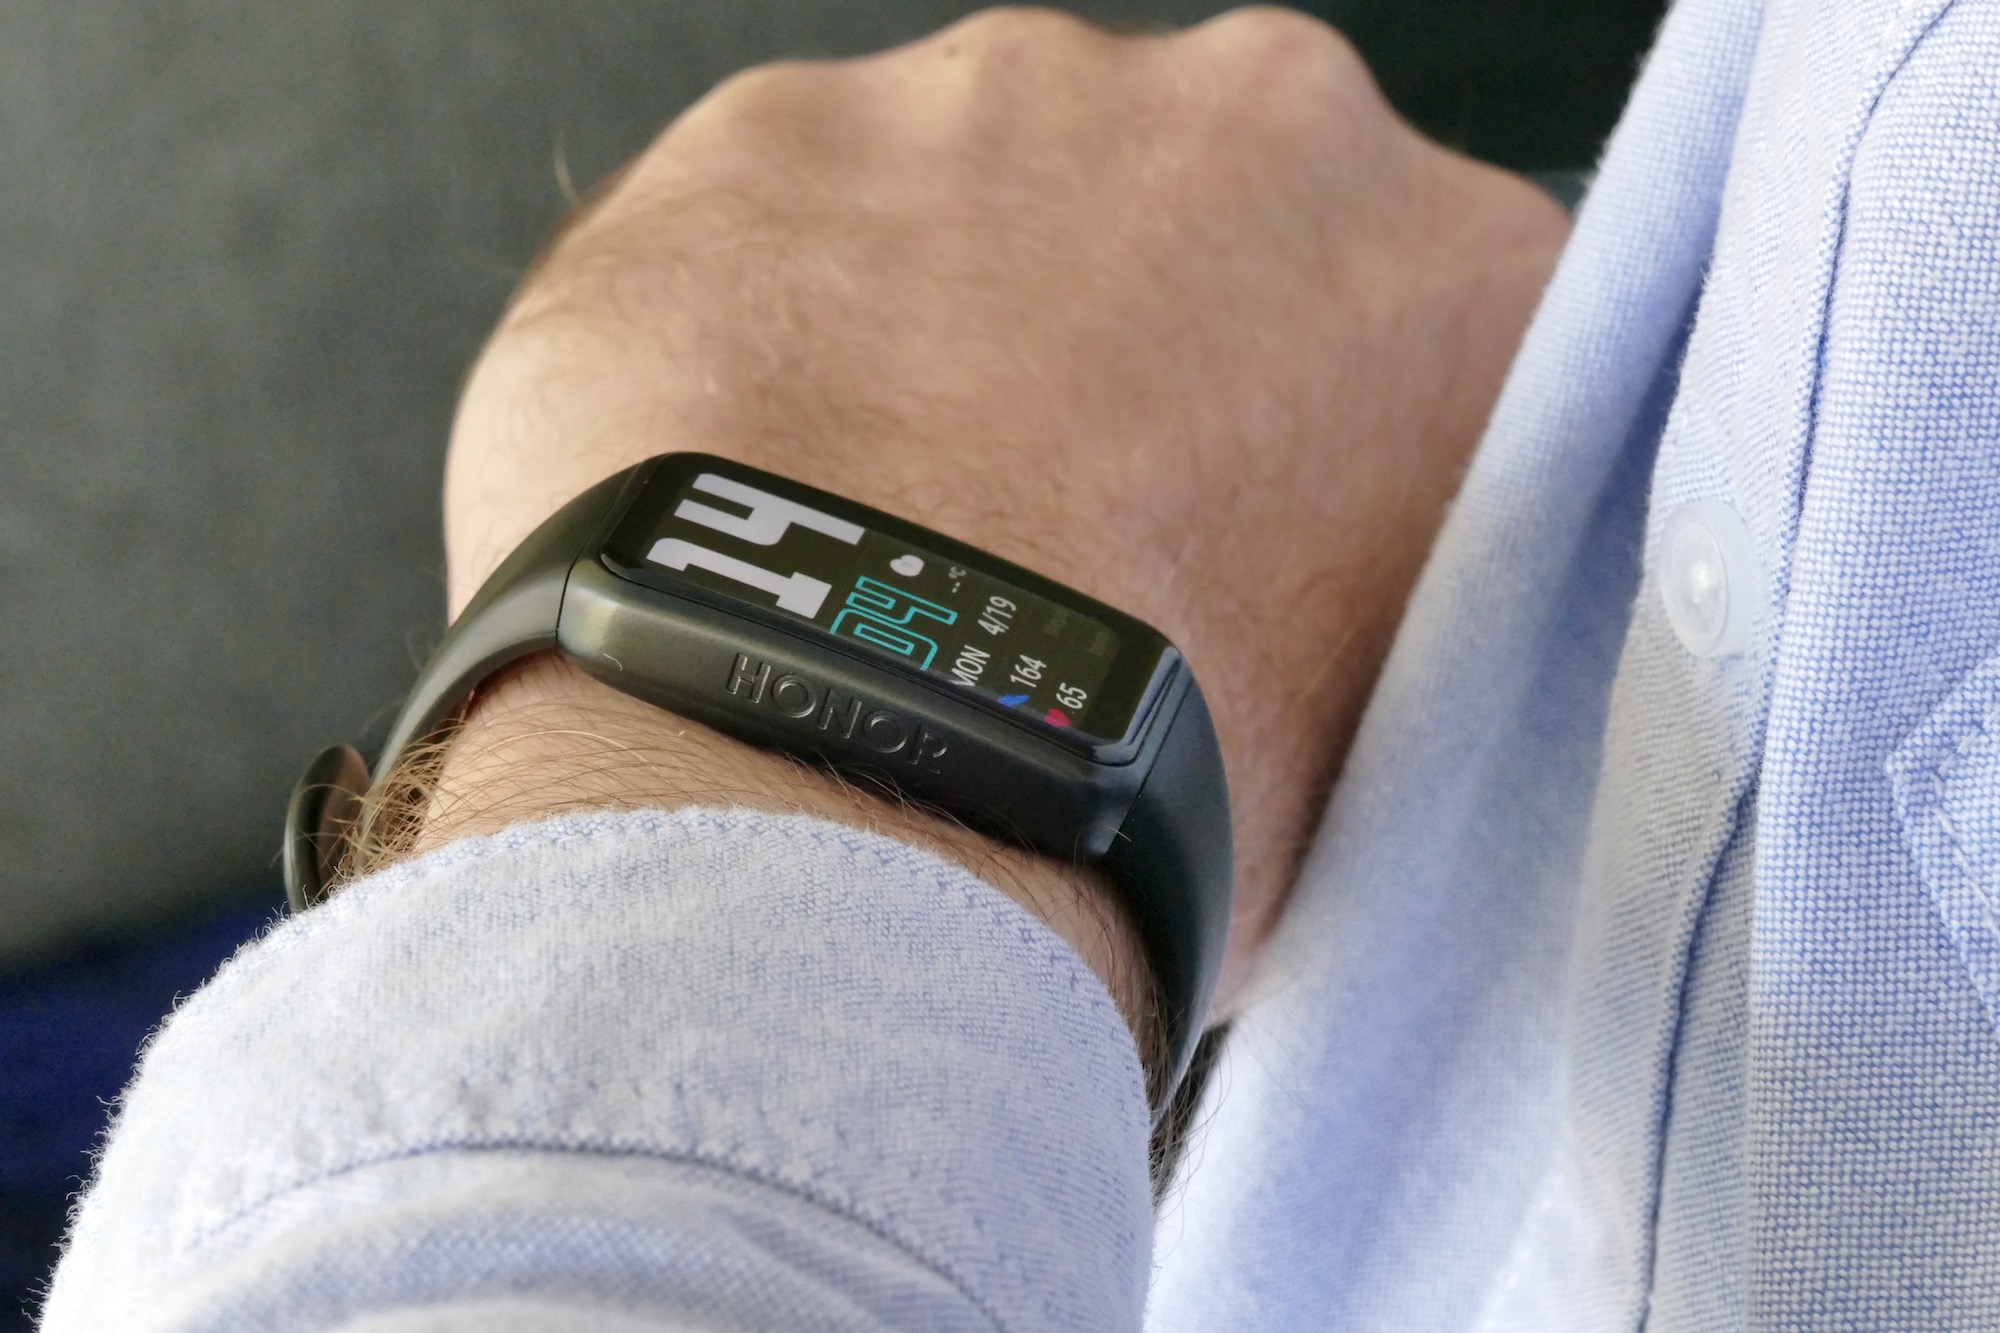 Honor Band 5 review: Attractive display, good fitness tracking to